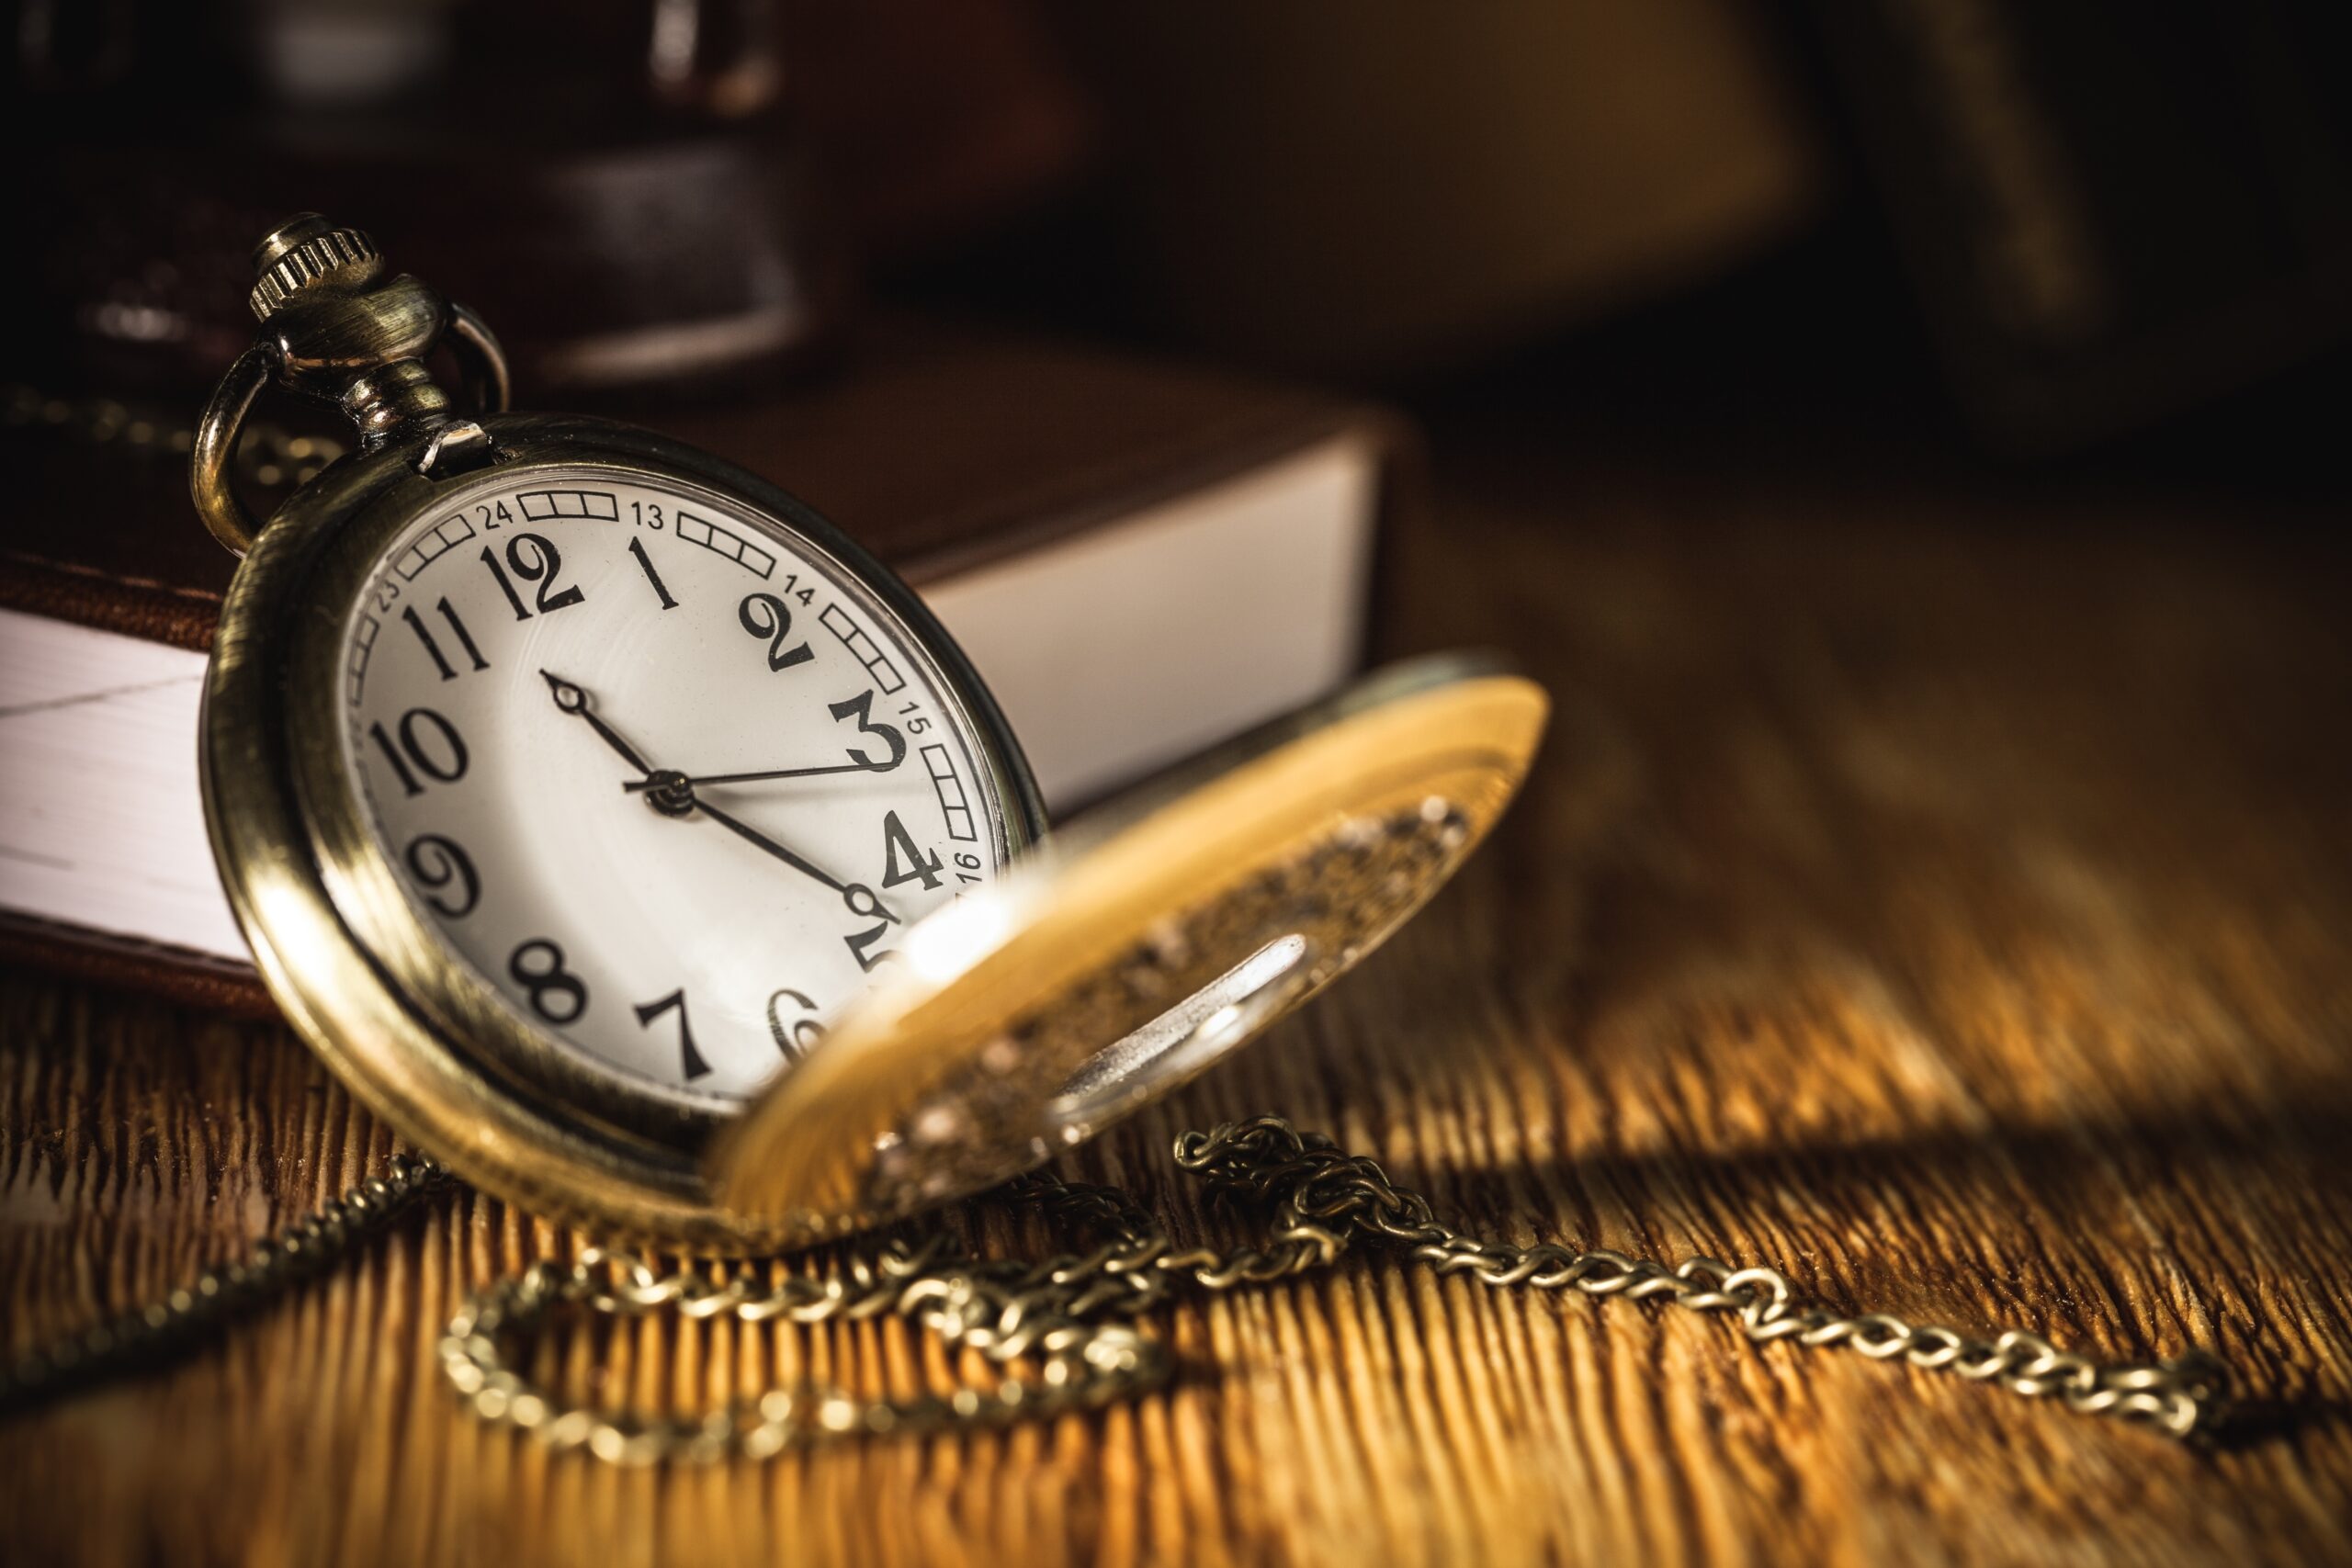 Vintage,Pocket,Watch,On,Wooden,Surface,Against,An,Old,Book